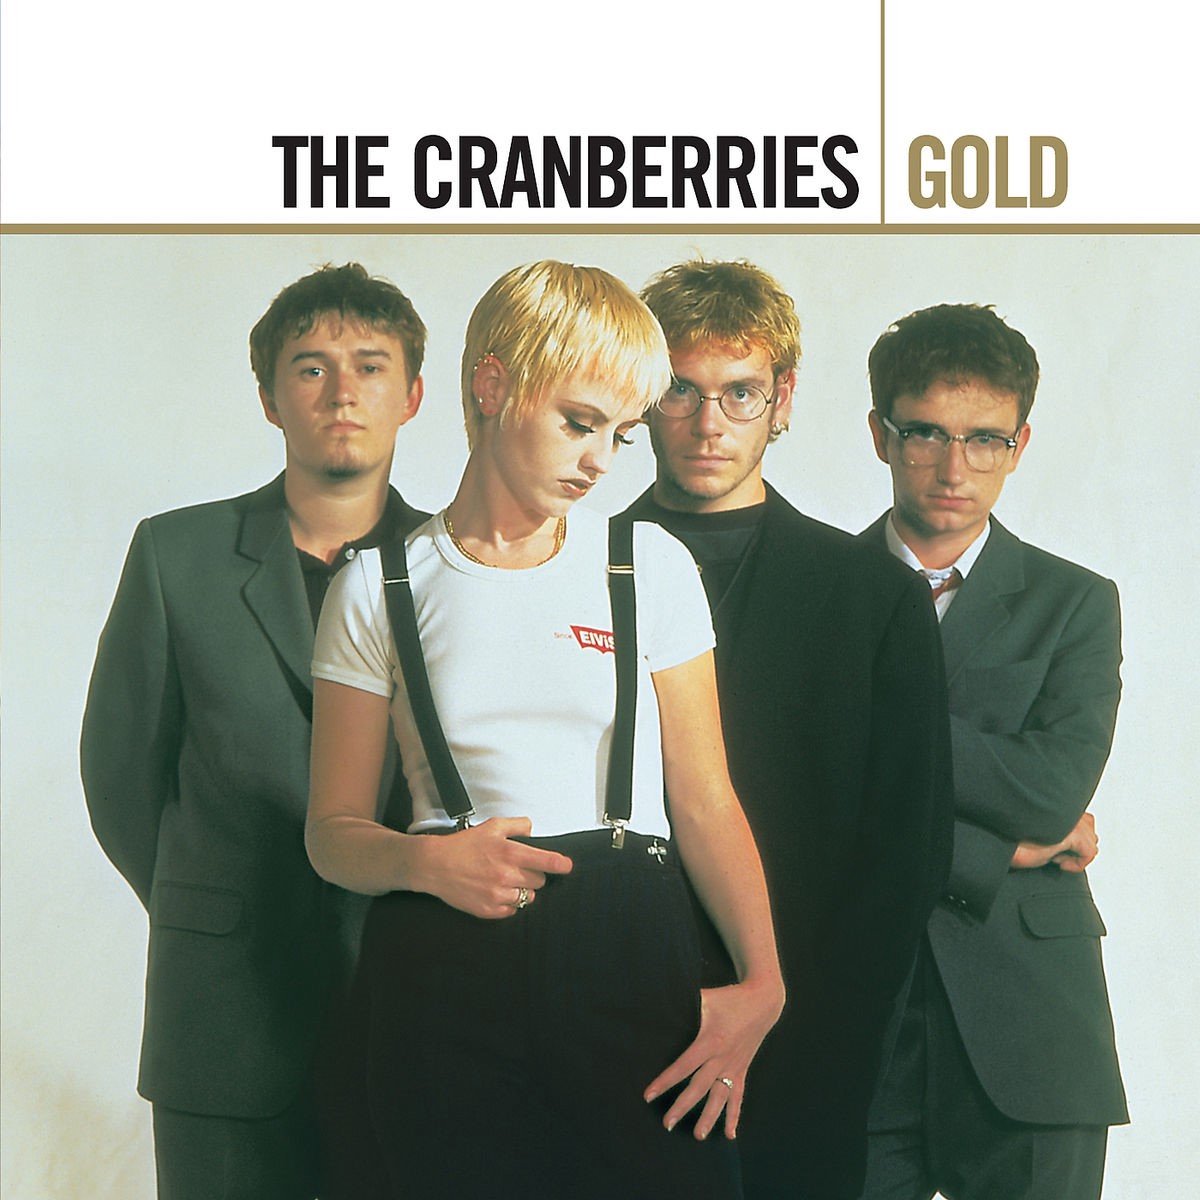 The Cranberries - Gold (2 CD) - the Cranberries